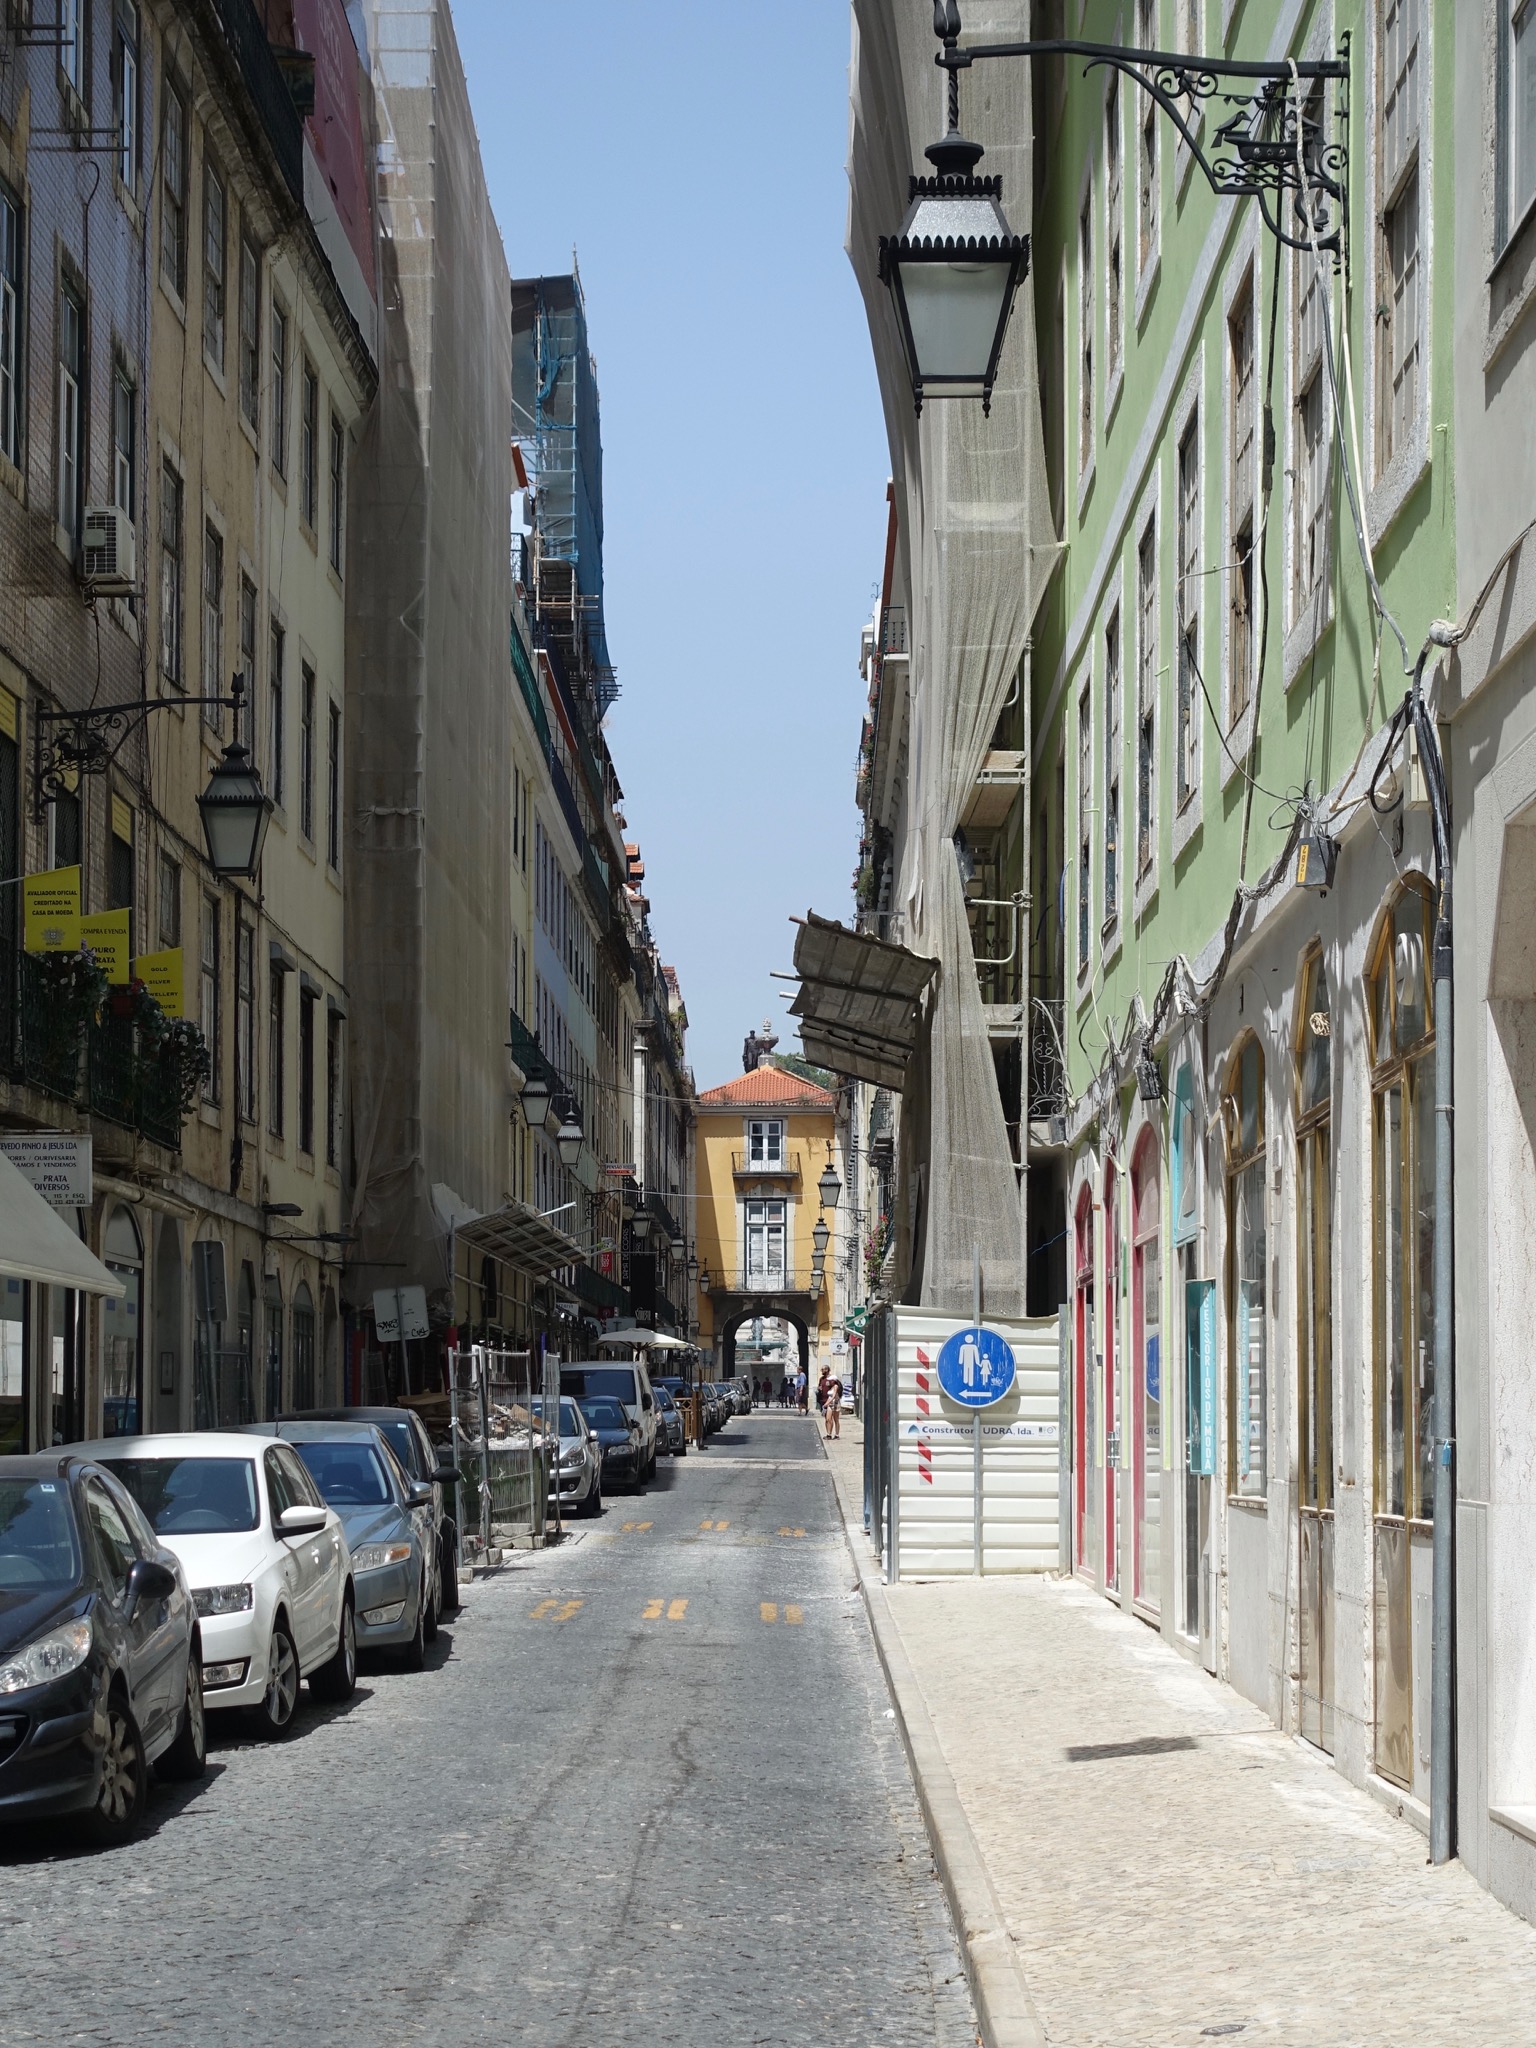 Photo 43 of 86 from the album Highlights Lisbon 2015.